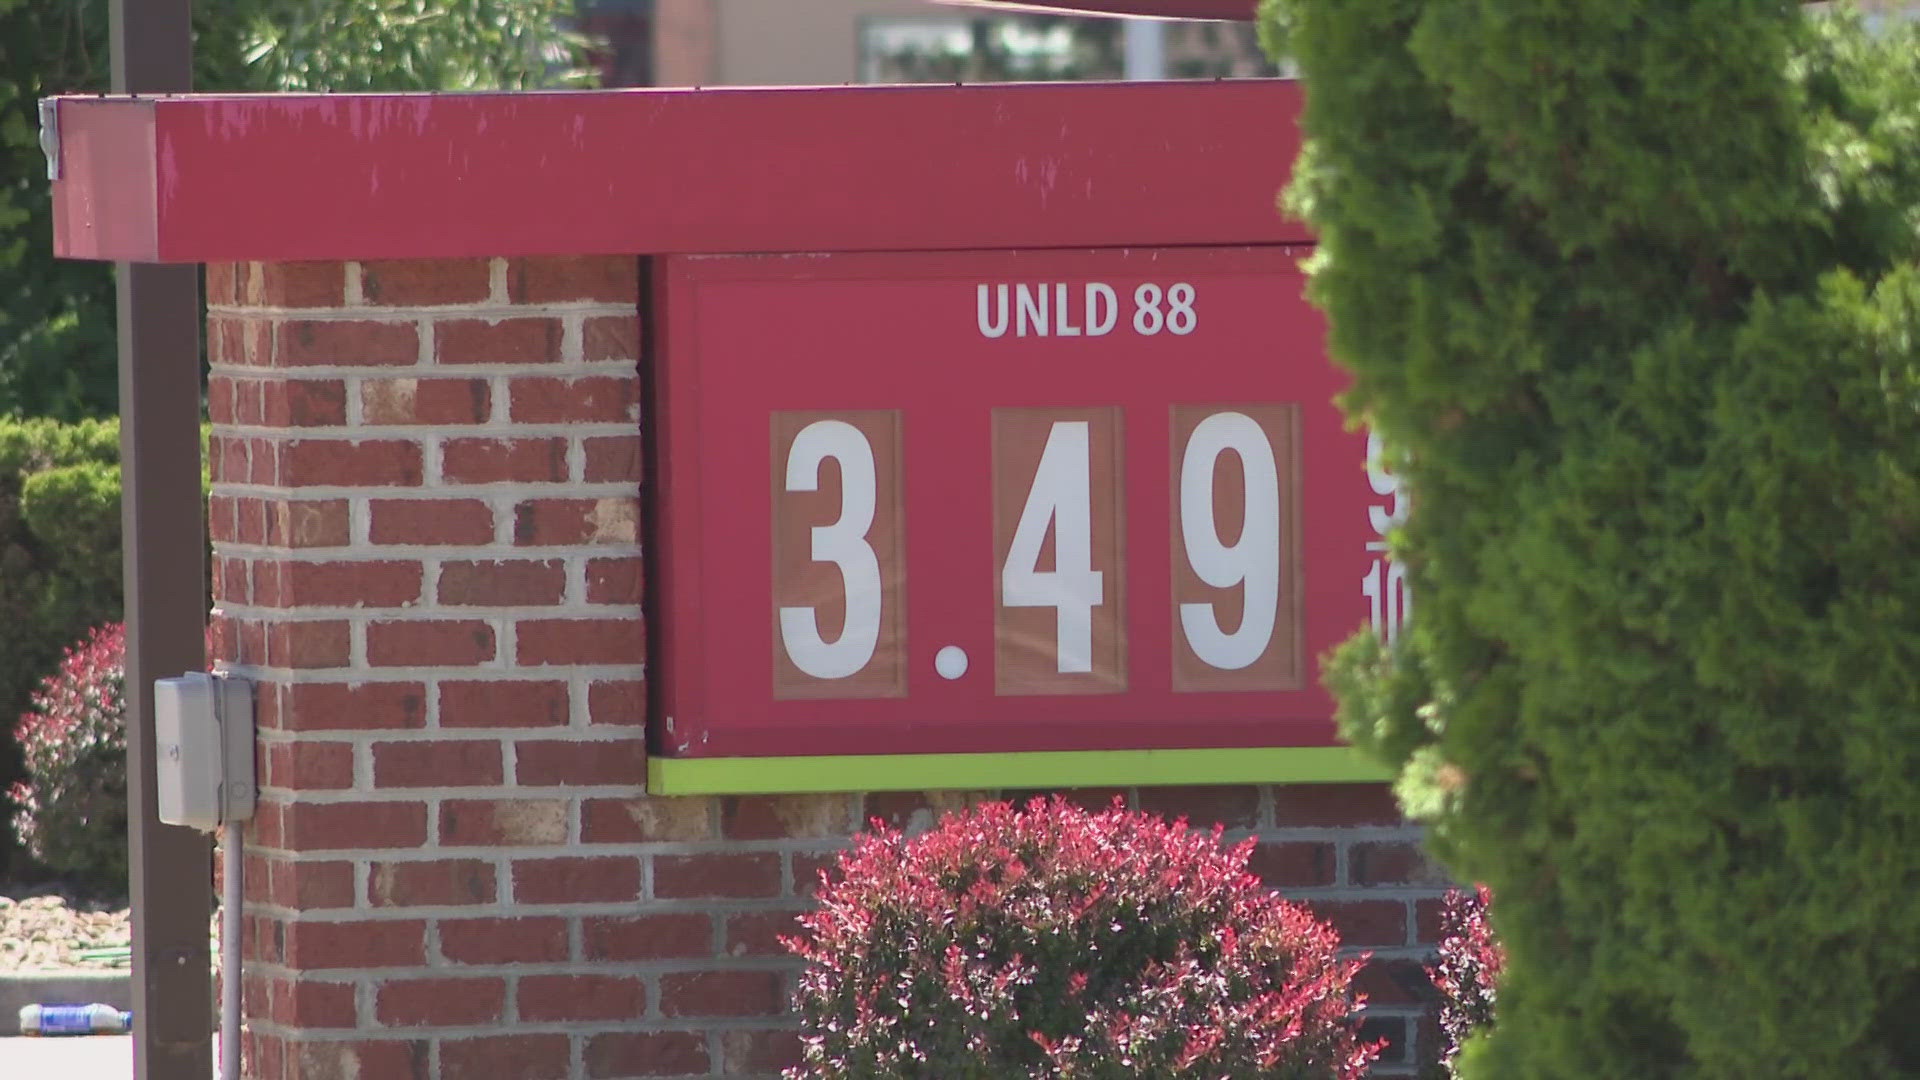 Both Akron and Cleveland are now listed higher than the national average, which GasBuddy says is currently at $3.46 per gallon.